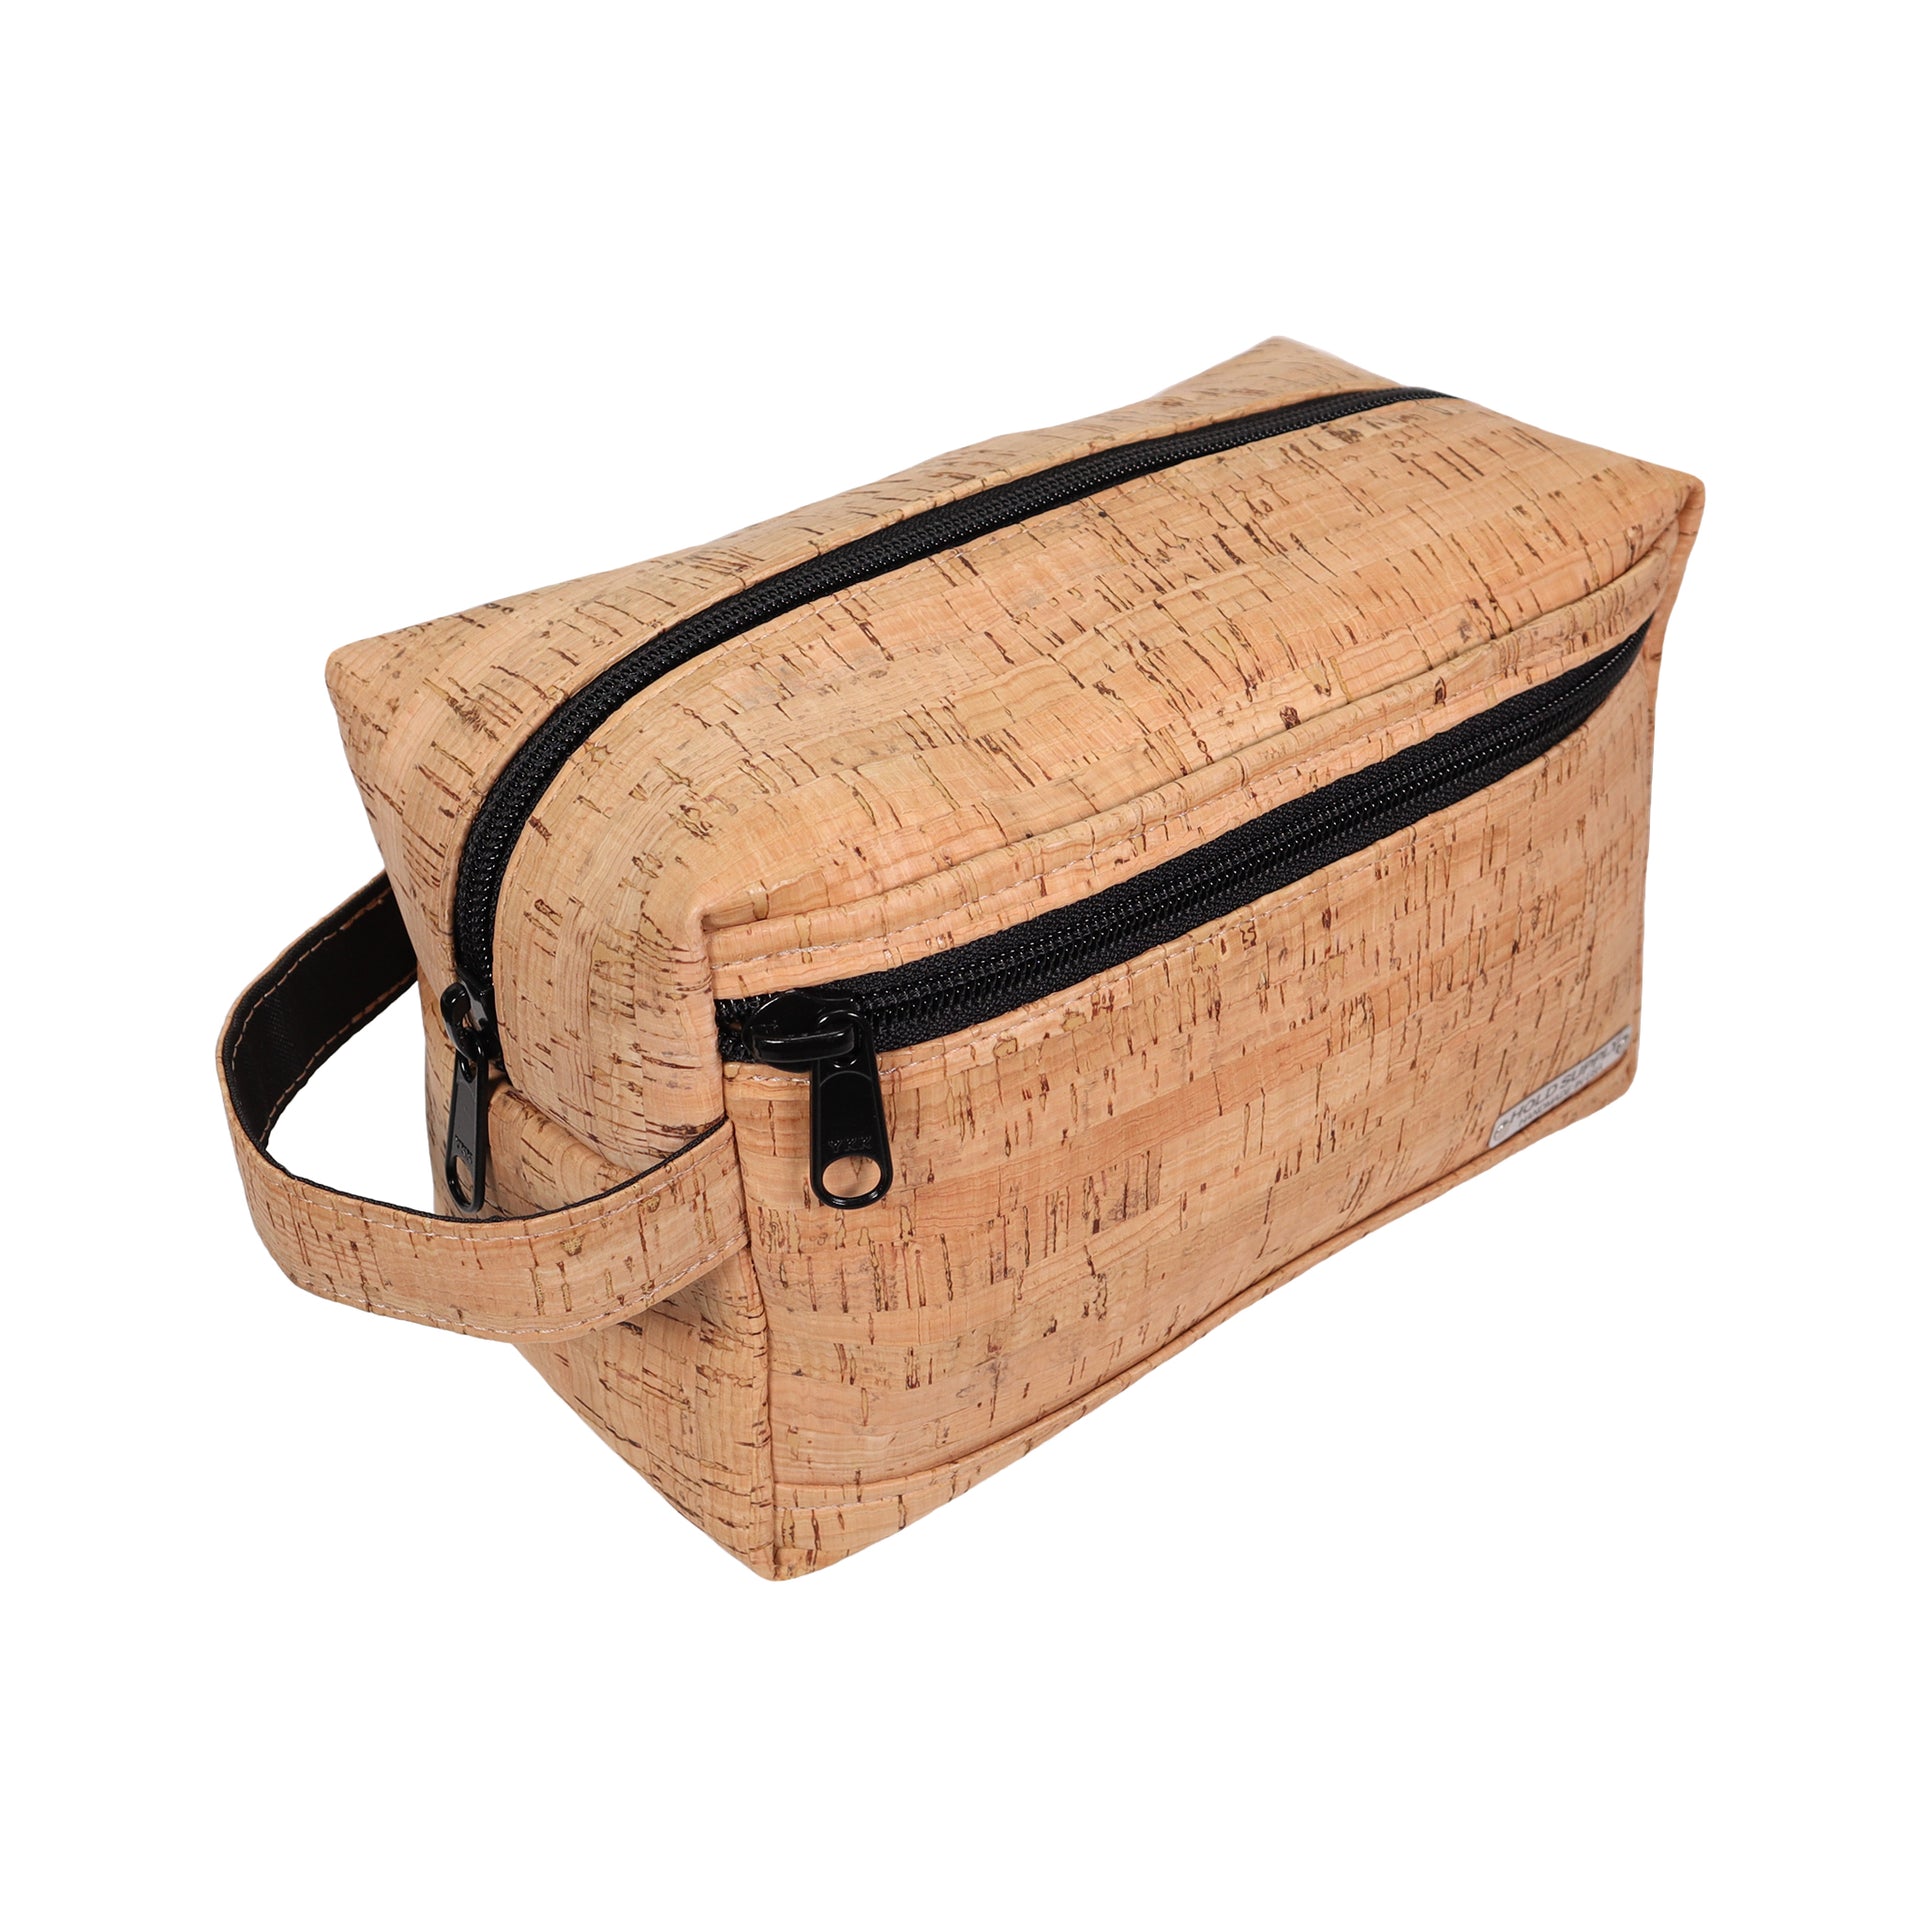 Vegan Cork Make Up and Toiletry Pouch - Green Vegan Bags